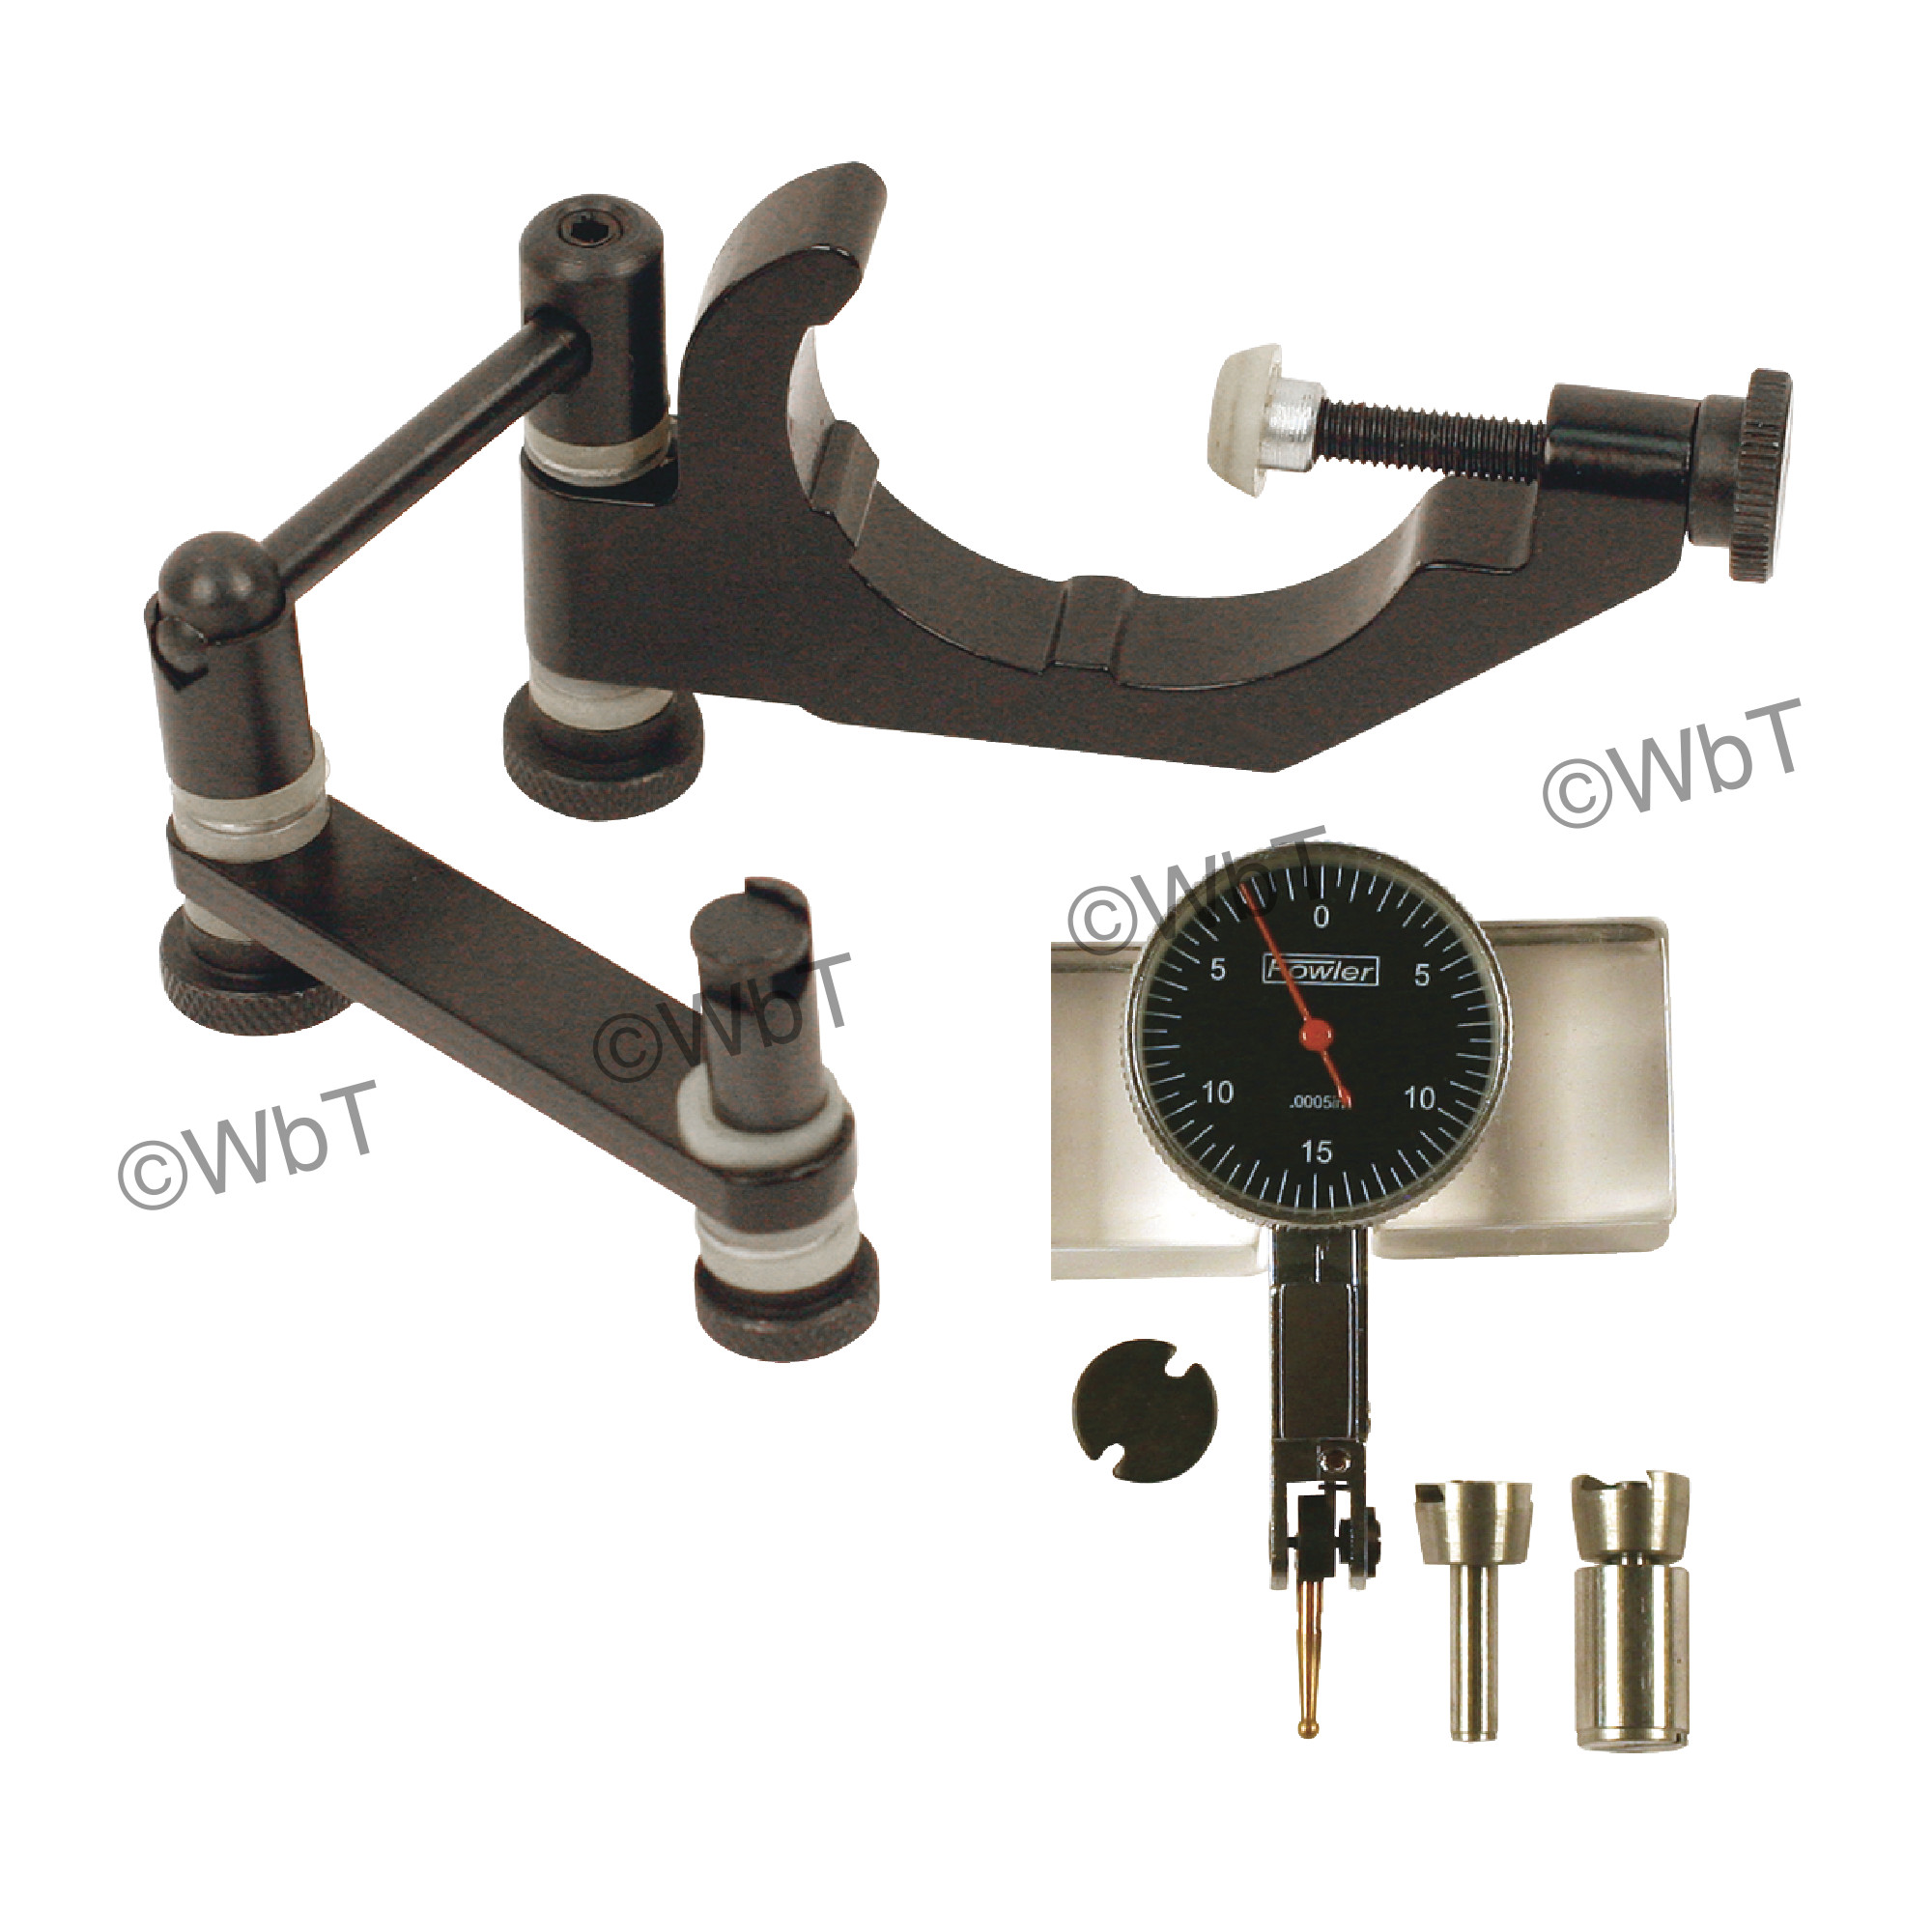 Fowler Dial Test Indicator With TTC Universal Holder